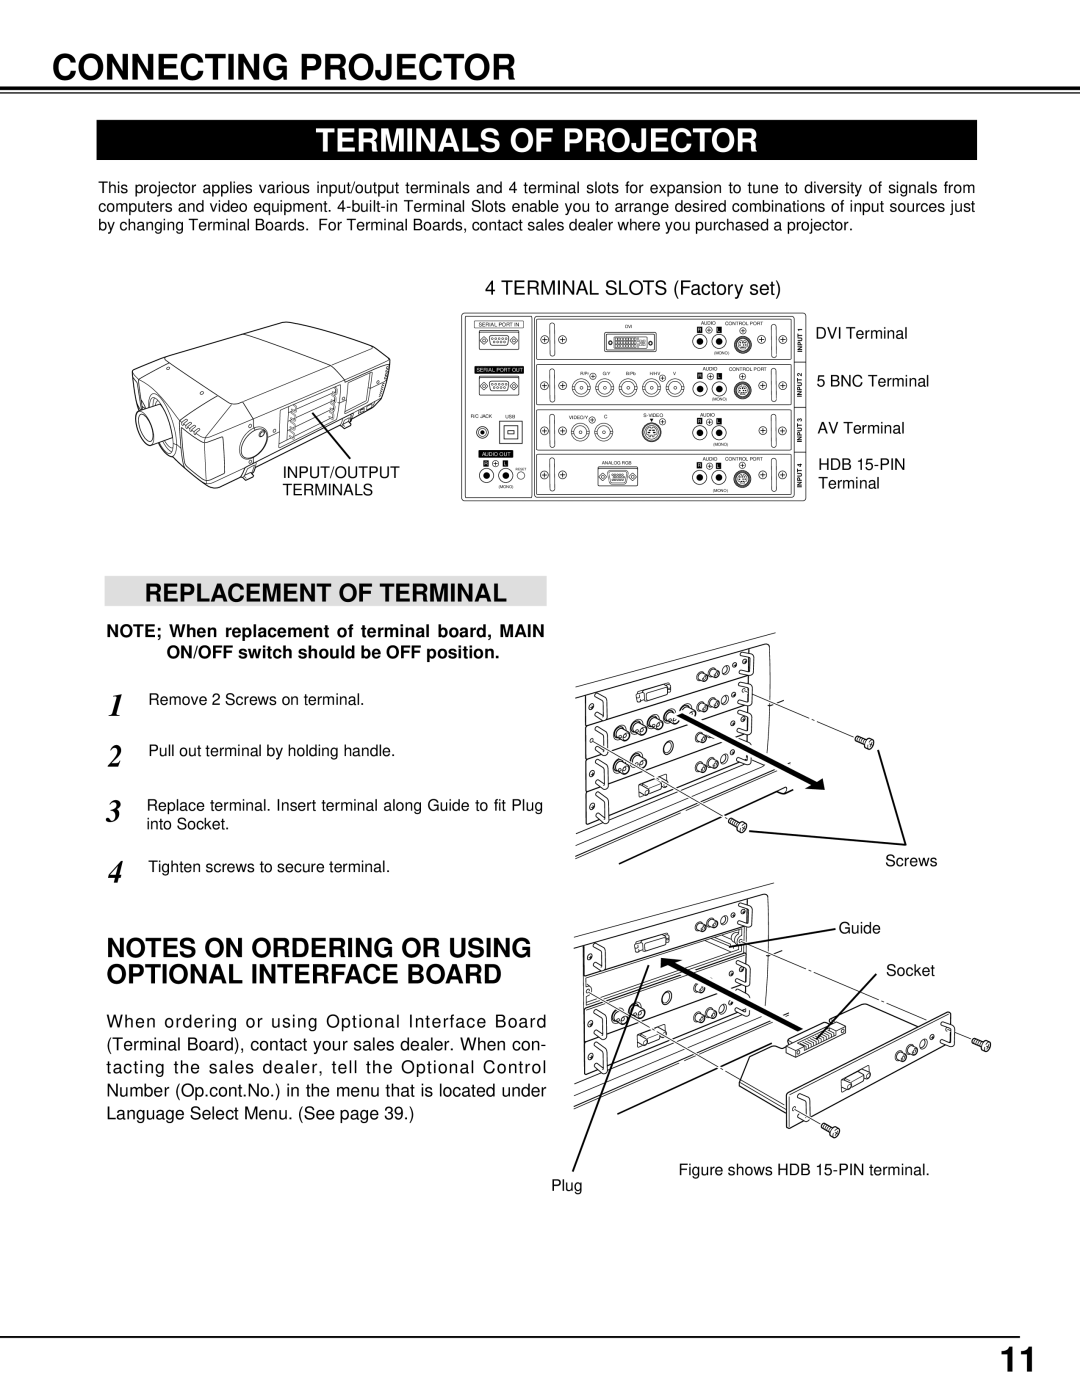 Eiki LC-XT3 instruction manual Connecting Projector, Terminals of Projector, Replacement of Terminal 